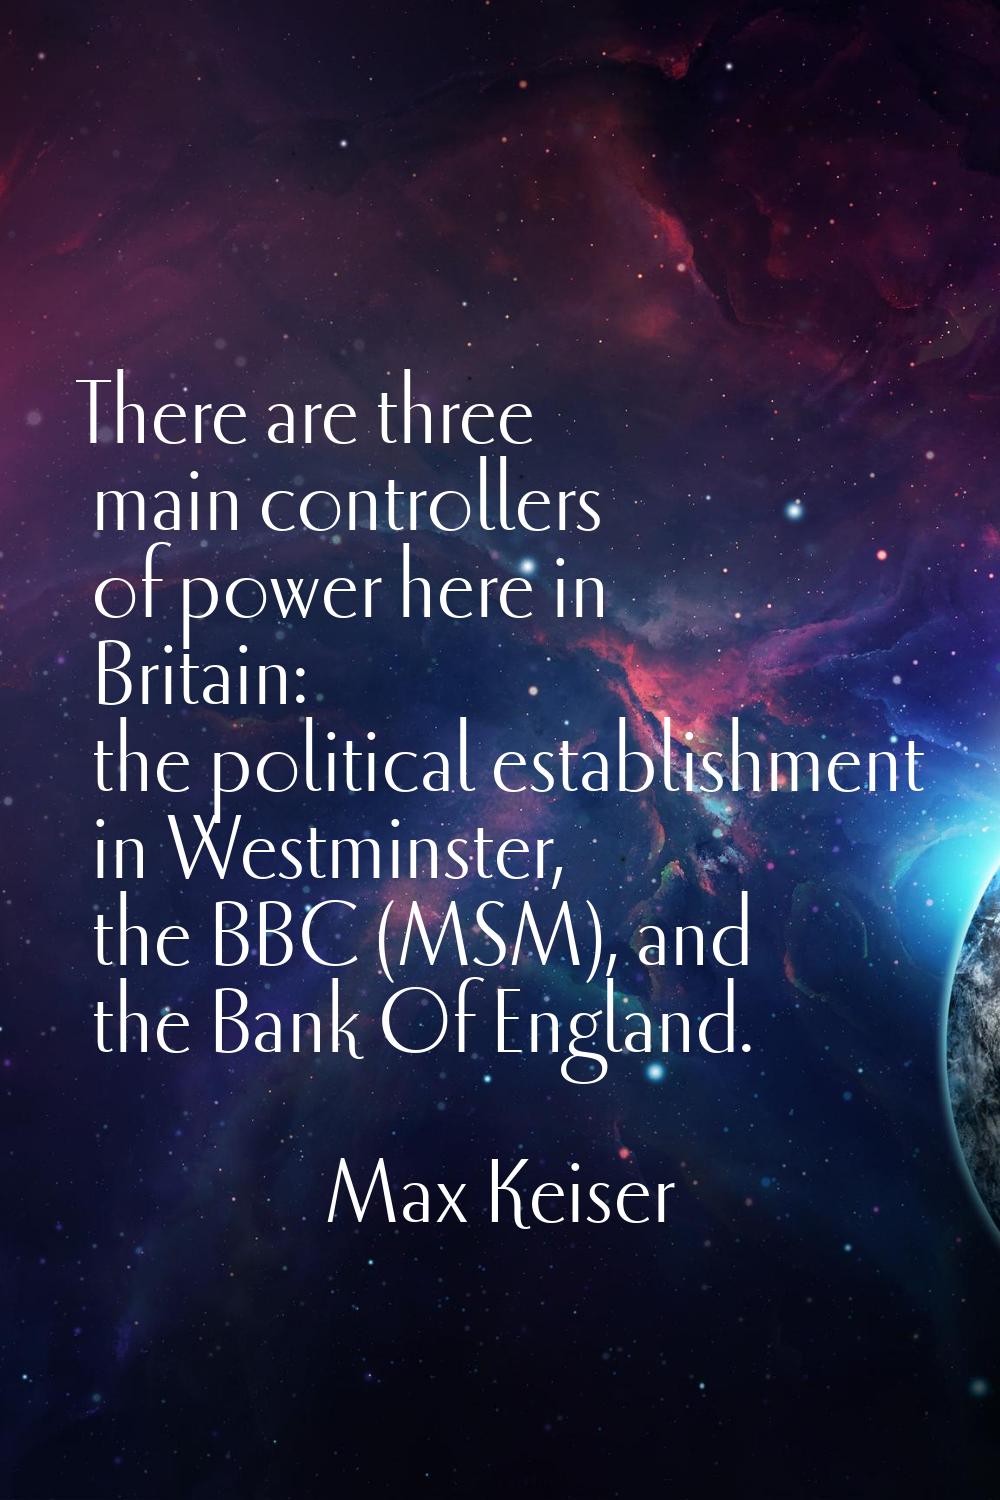 There are three main controllers of power here in Britain: the political establishment in Westminst